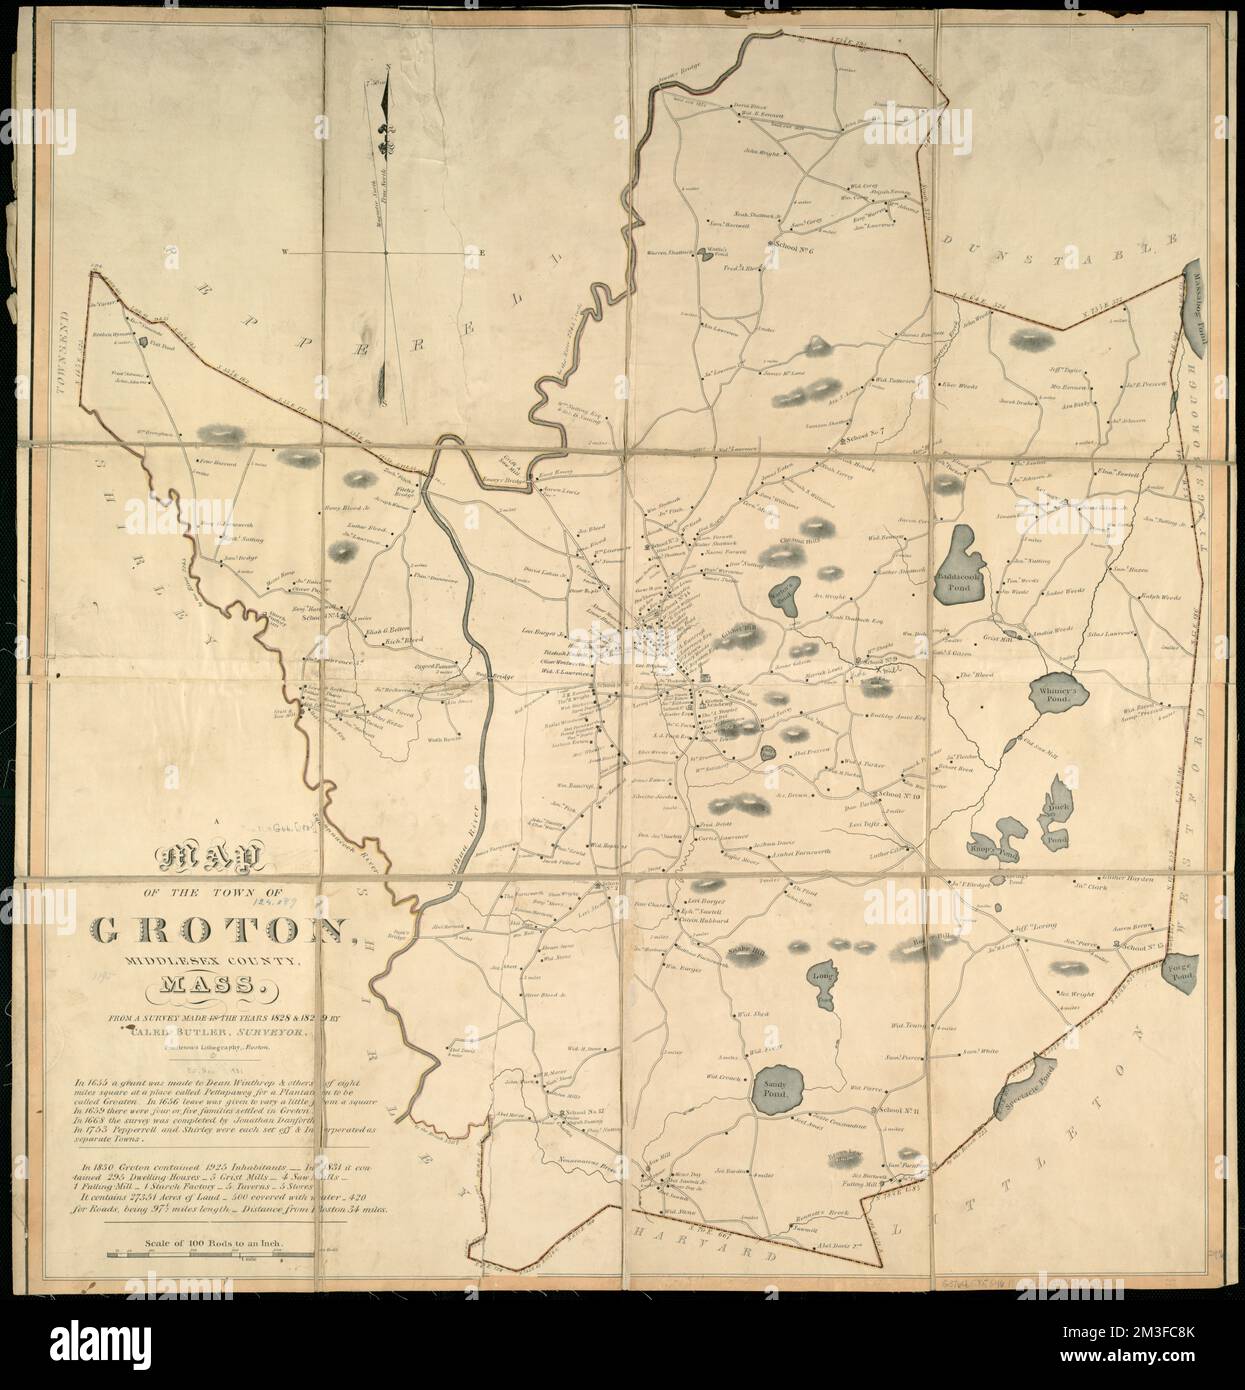 a-map-of-the-town-of-groton-middlesex-county-mass-landowners